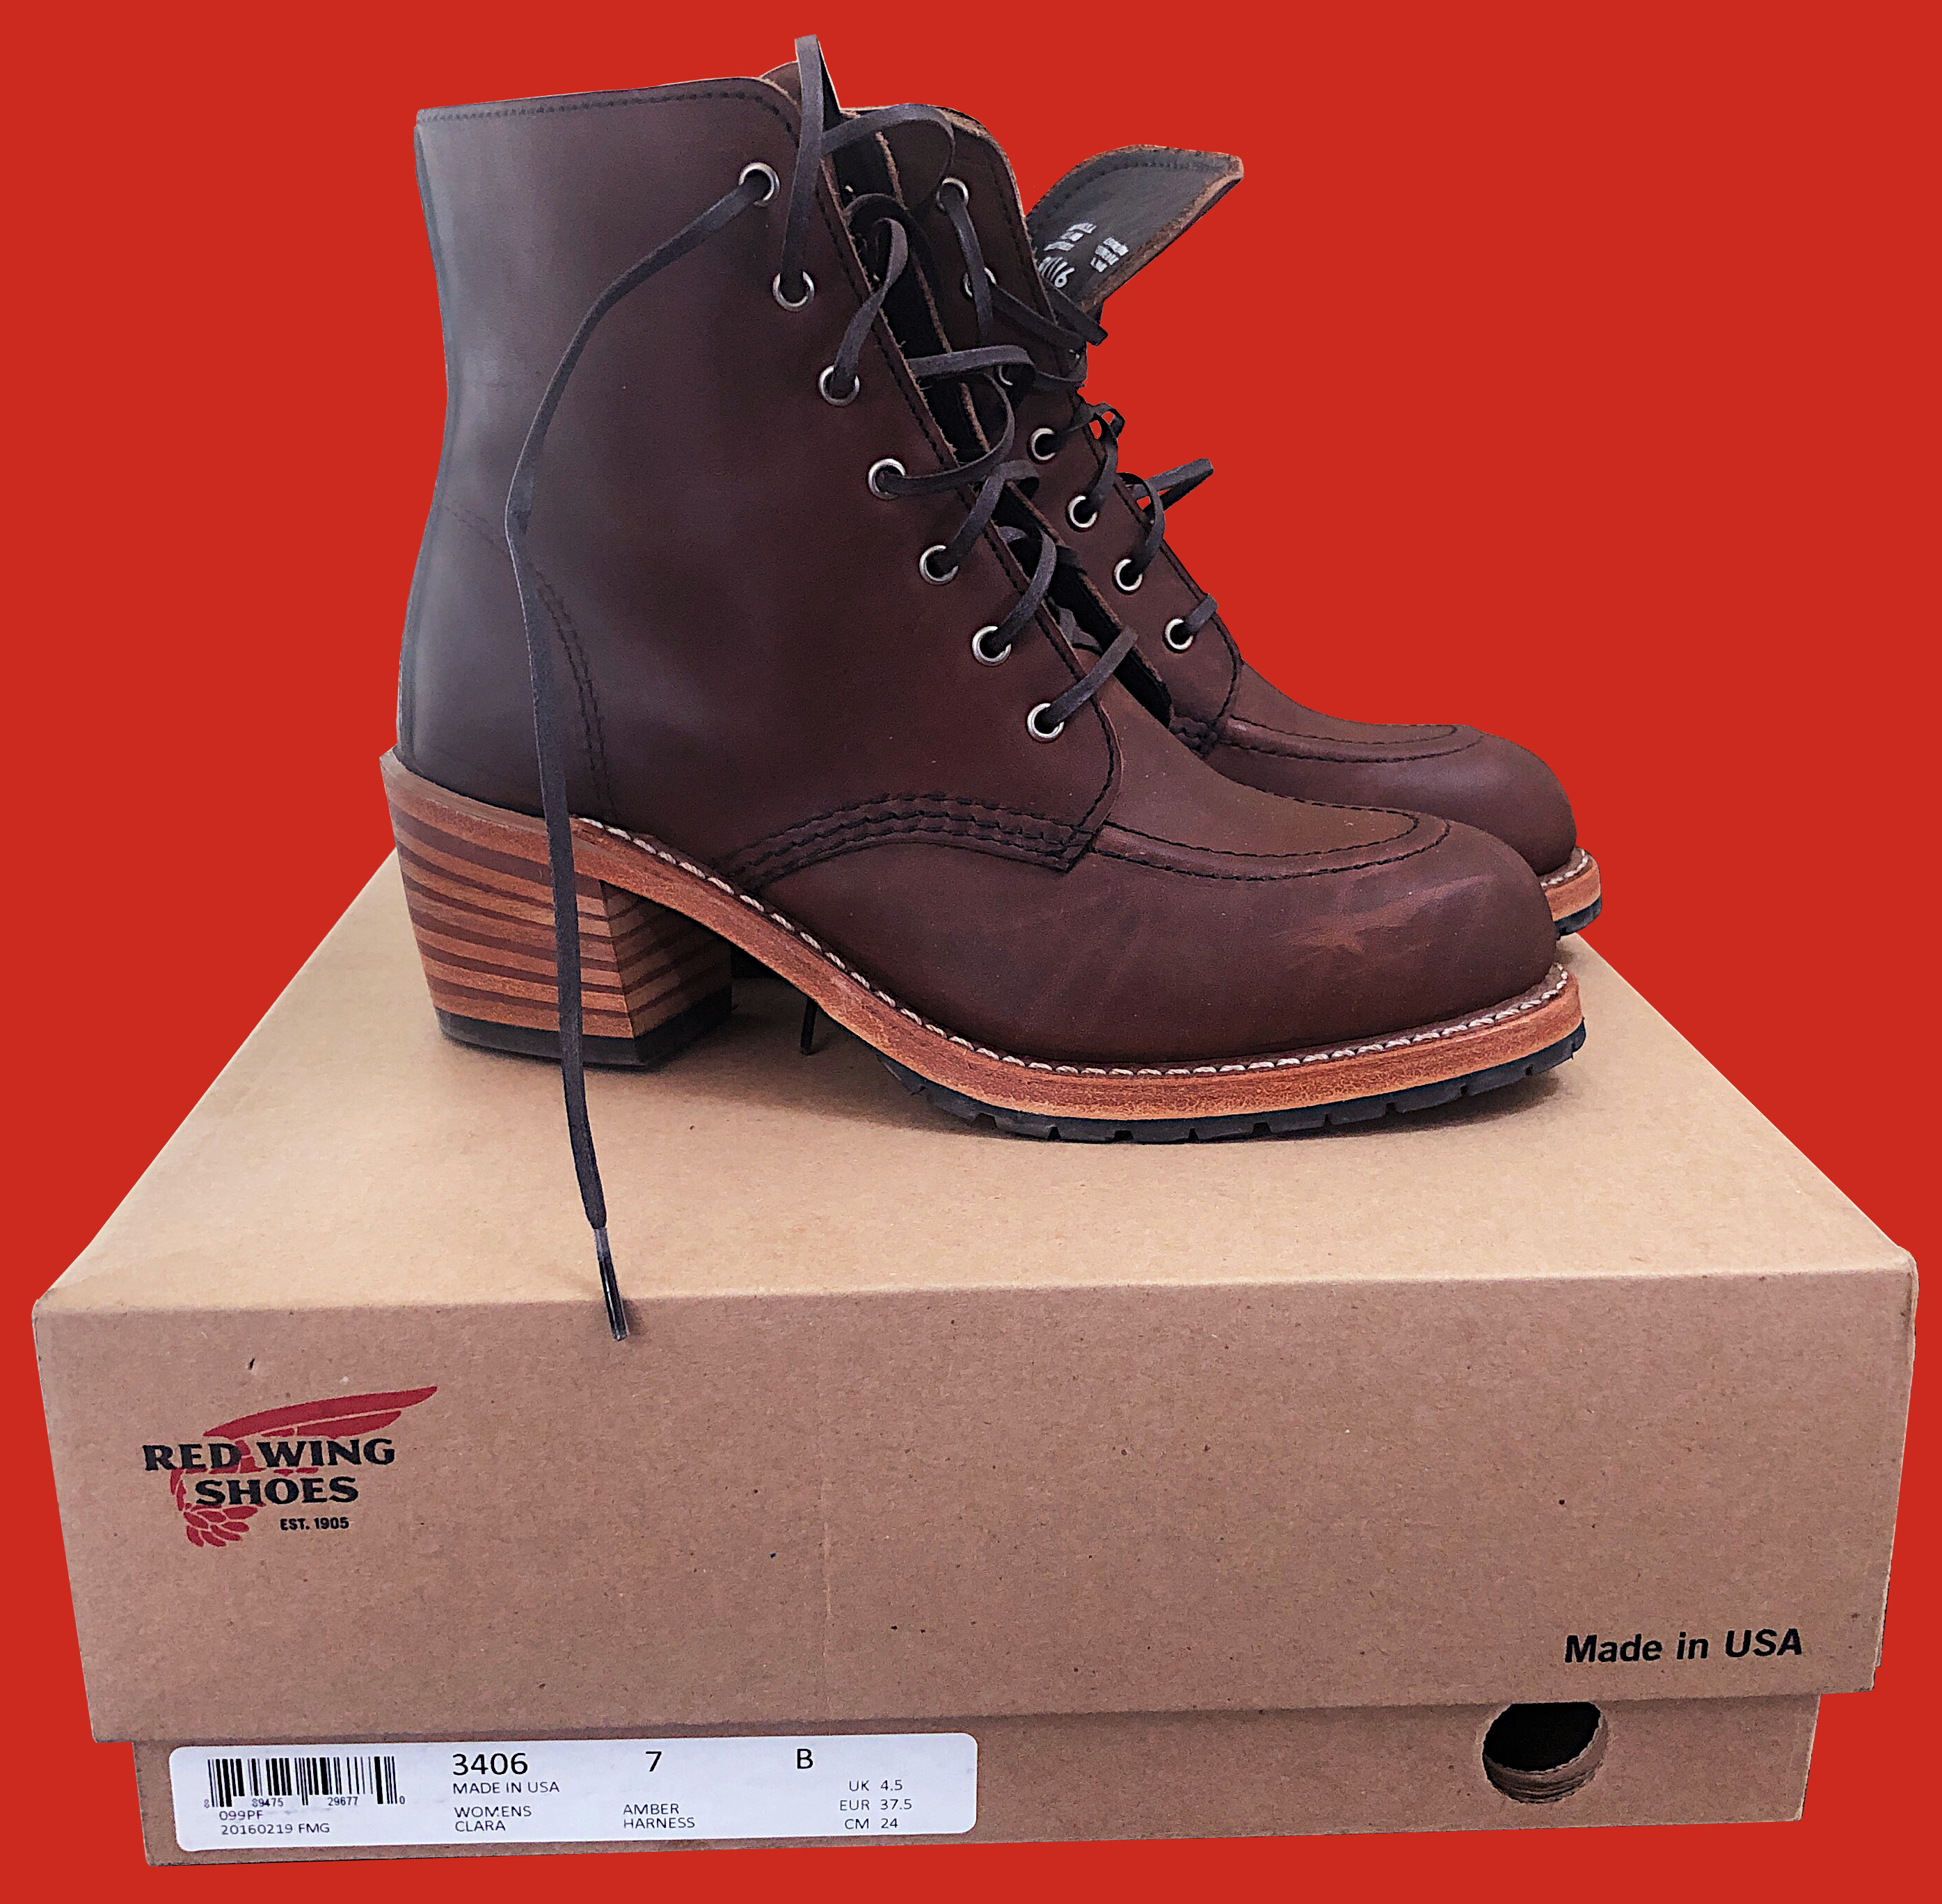 red wing shoes women's boots